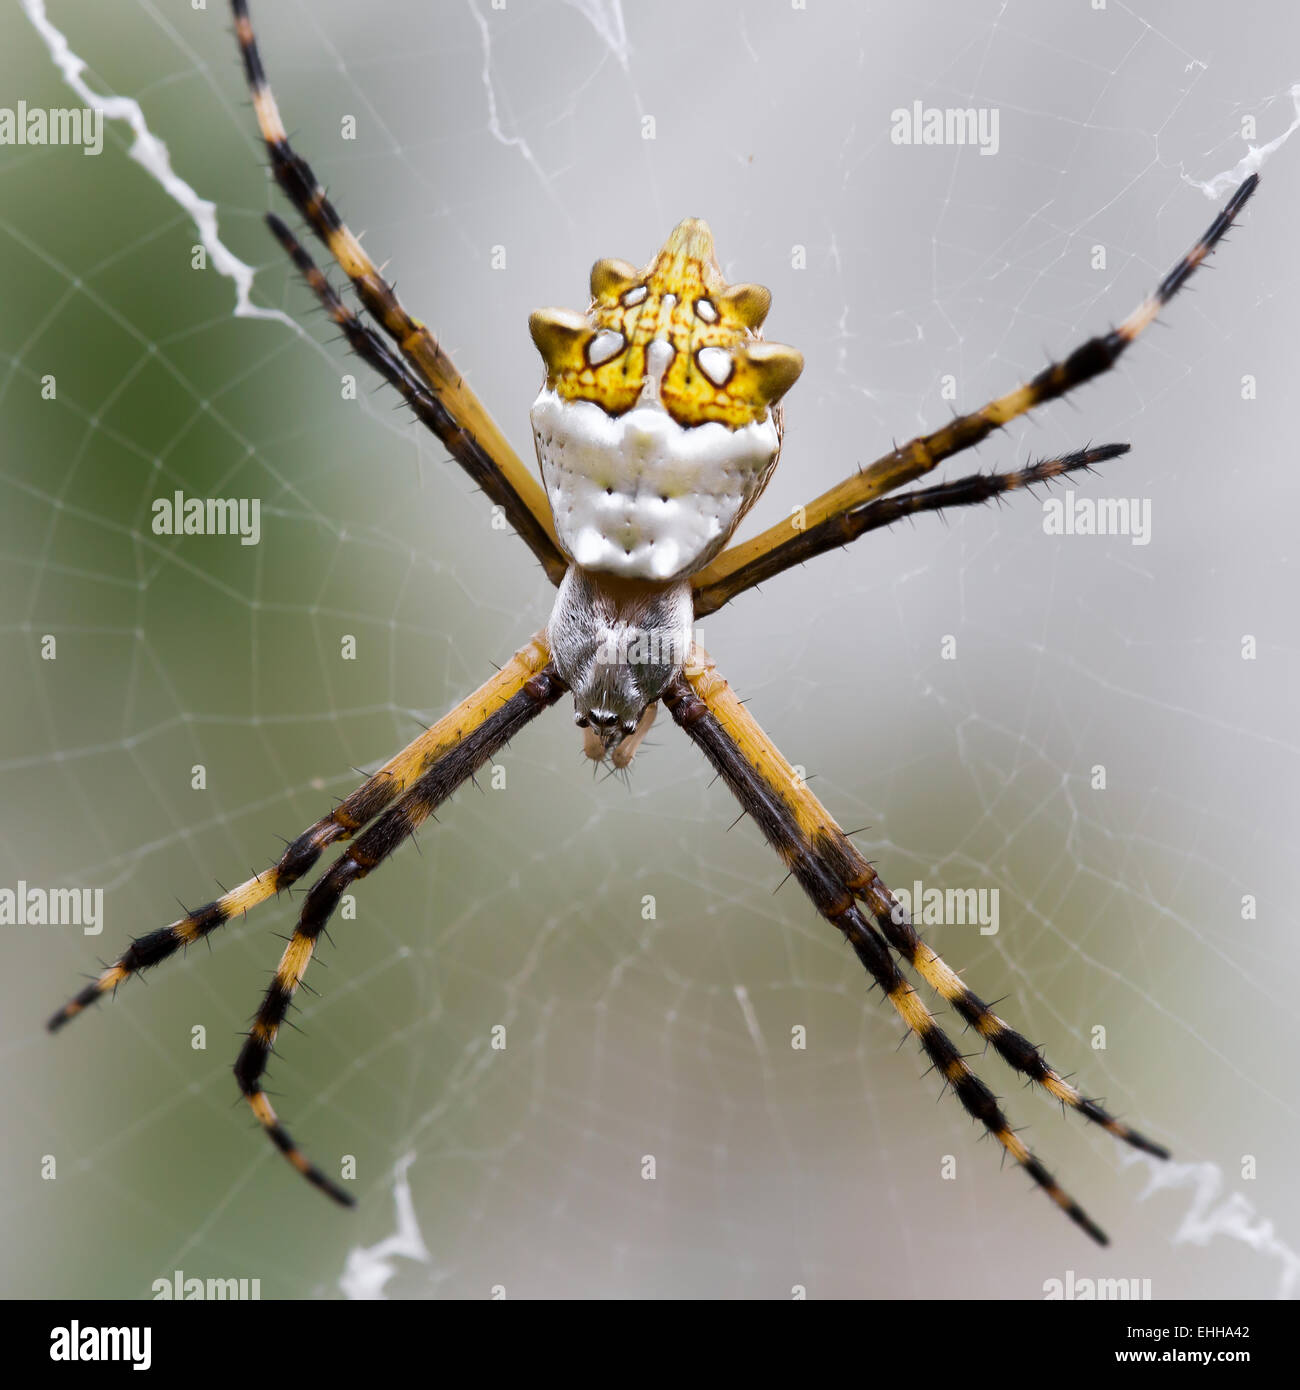 Black and Yellow Argiope spider on web in the garden Stock Photo